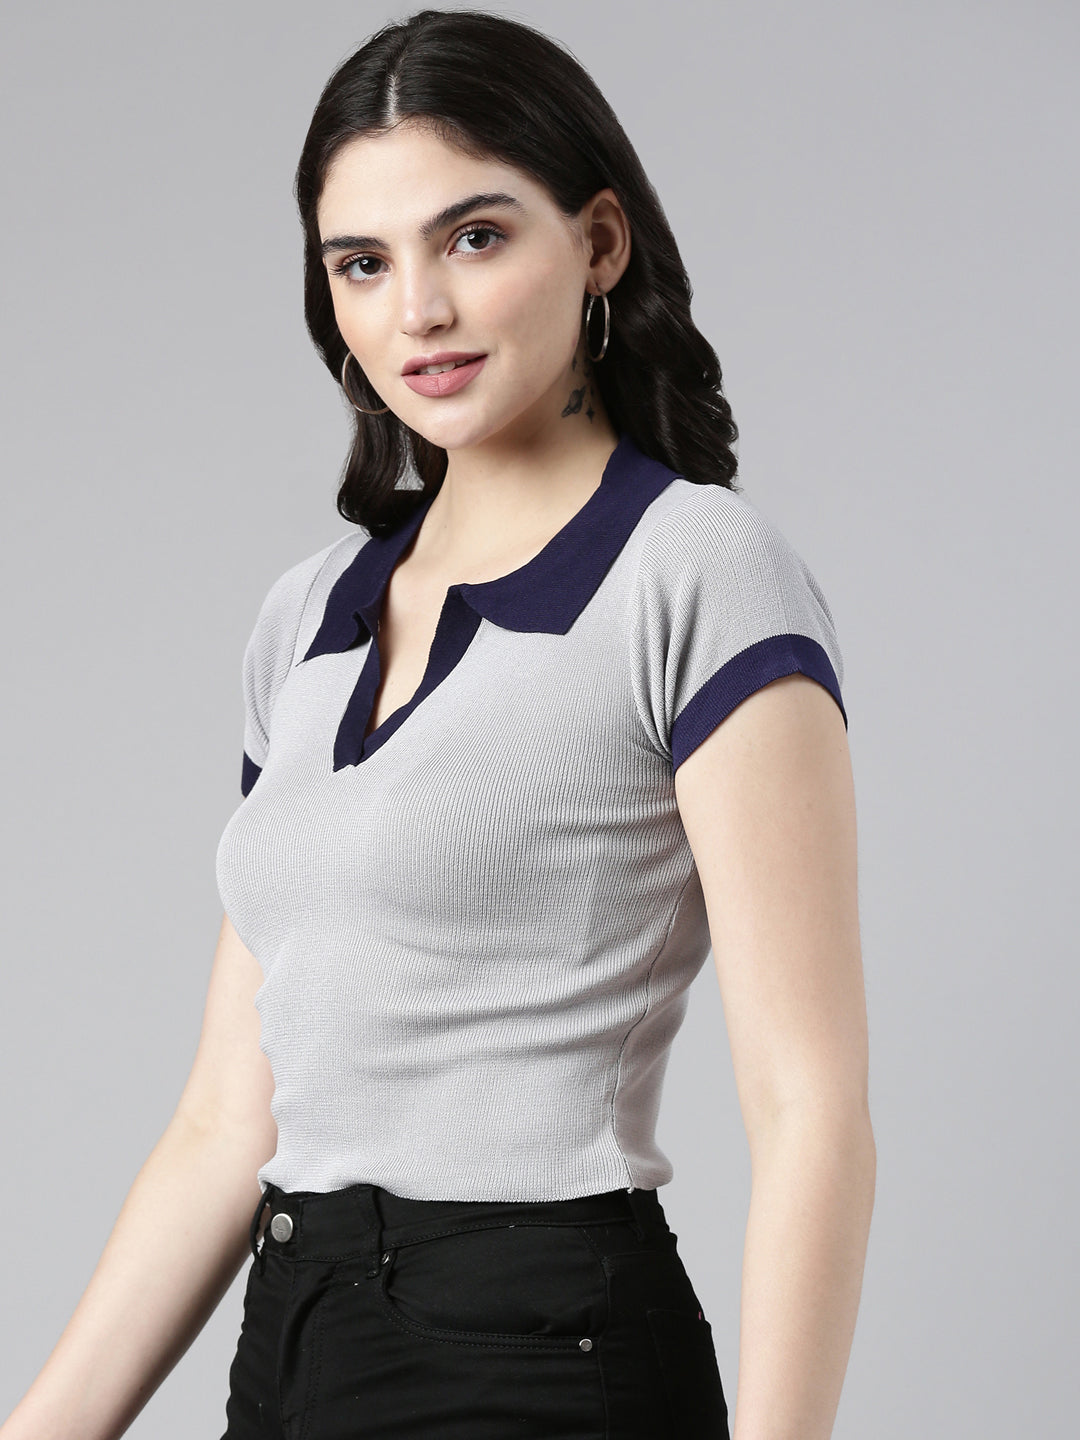 Above the Keyboard Collar Solid Grey Crop Top